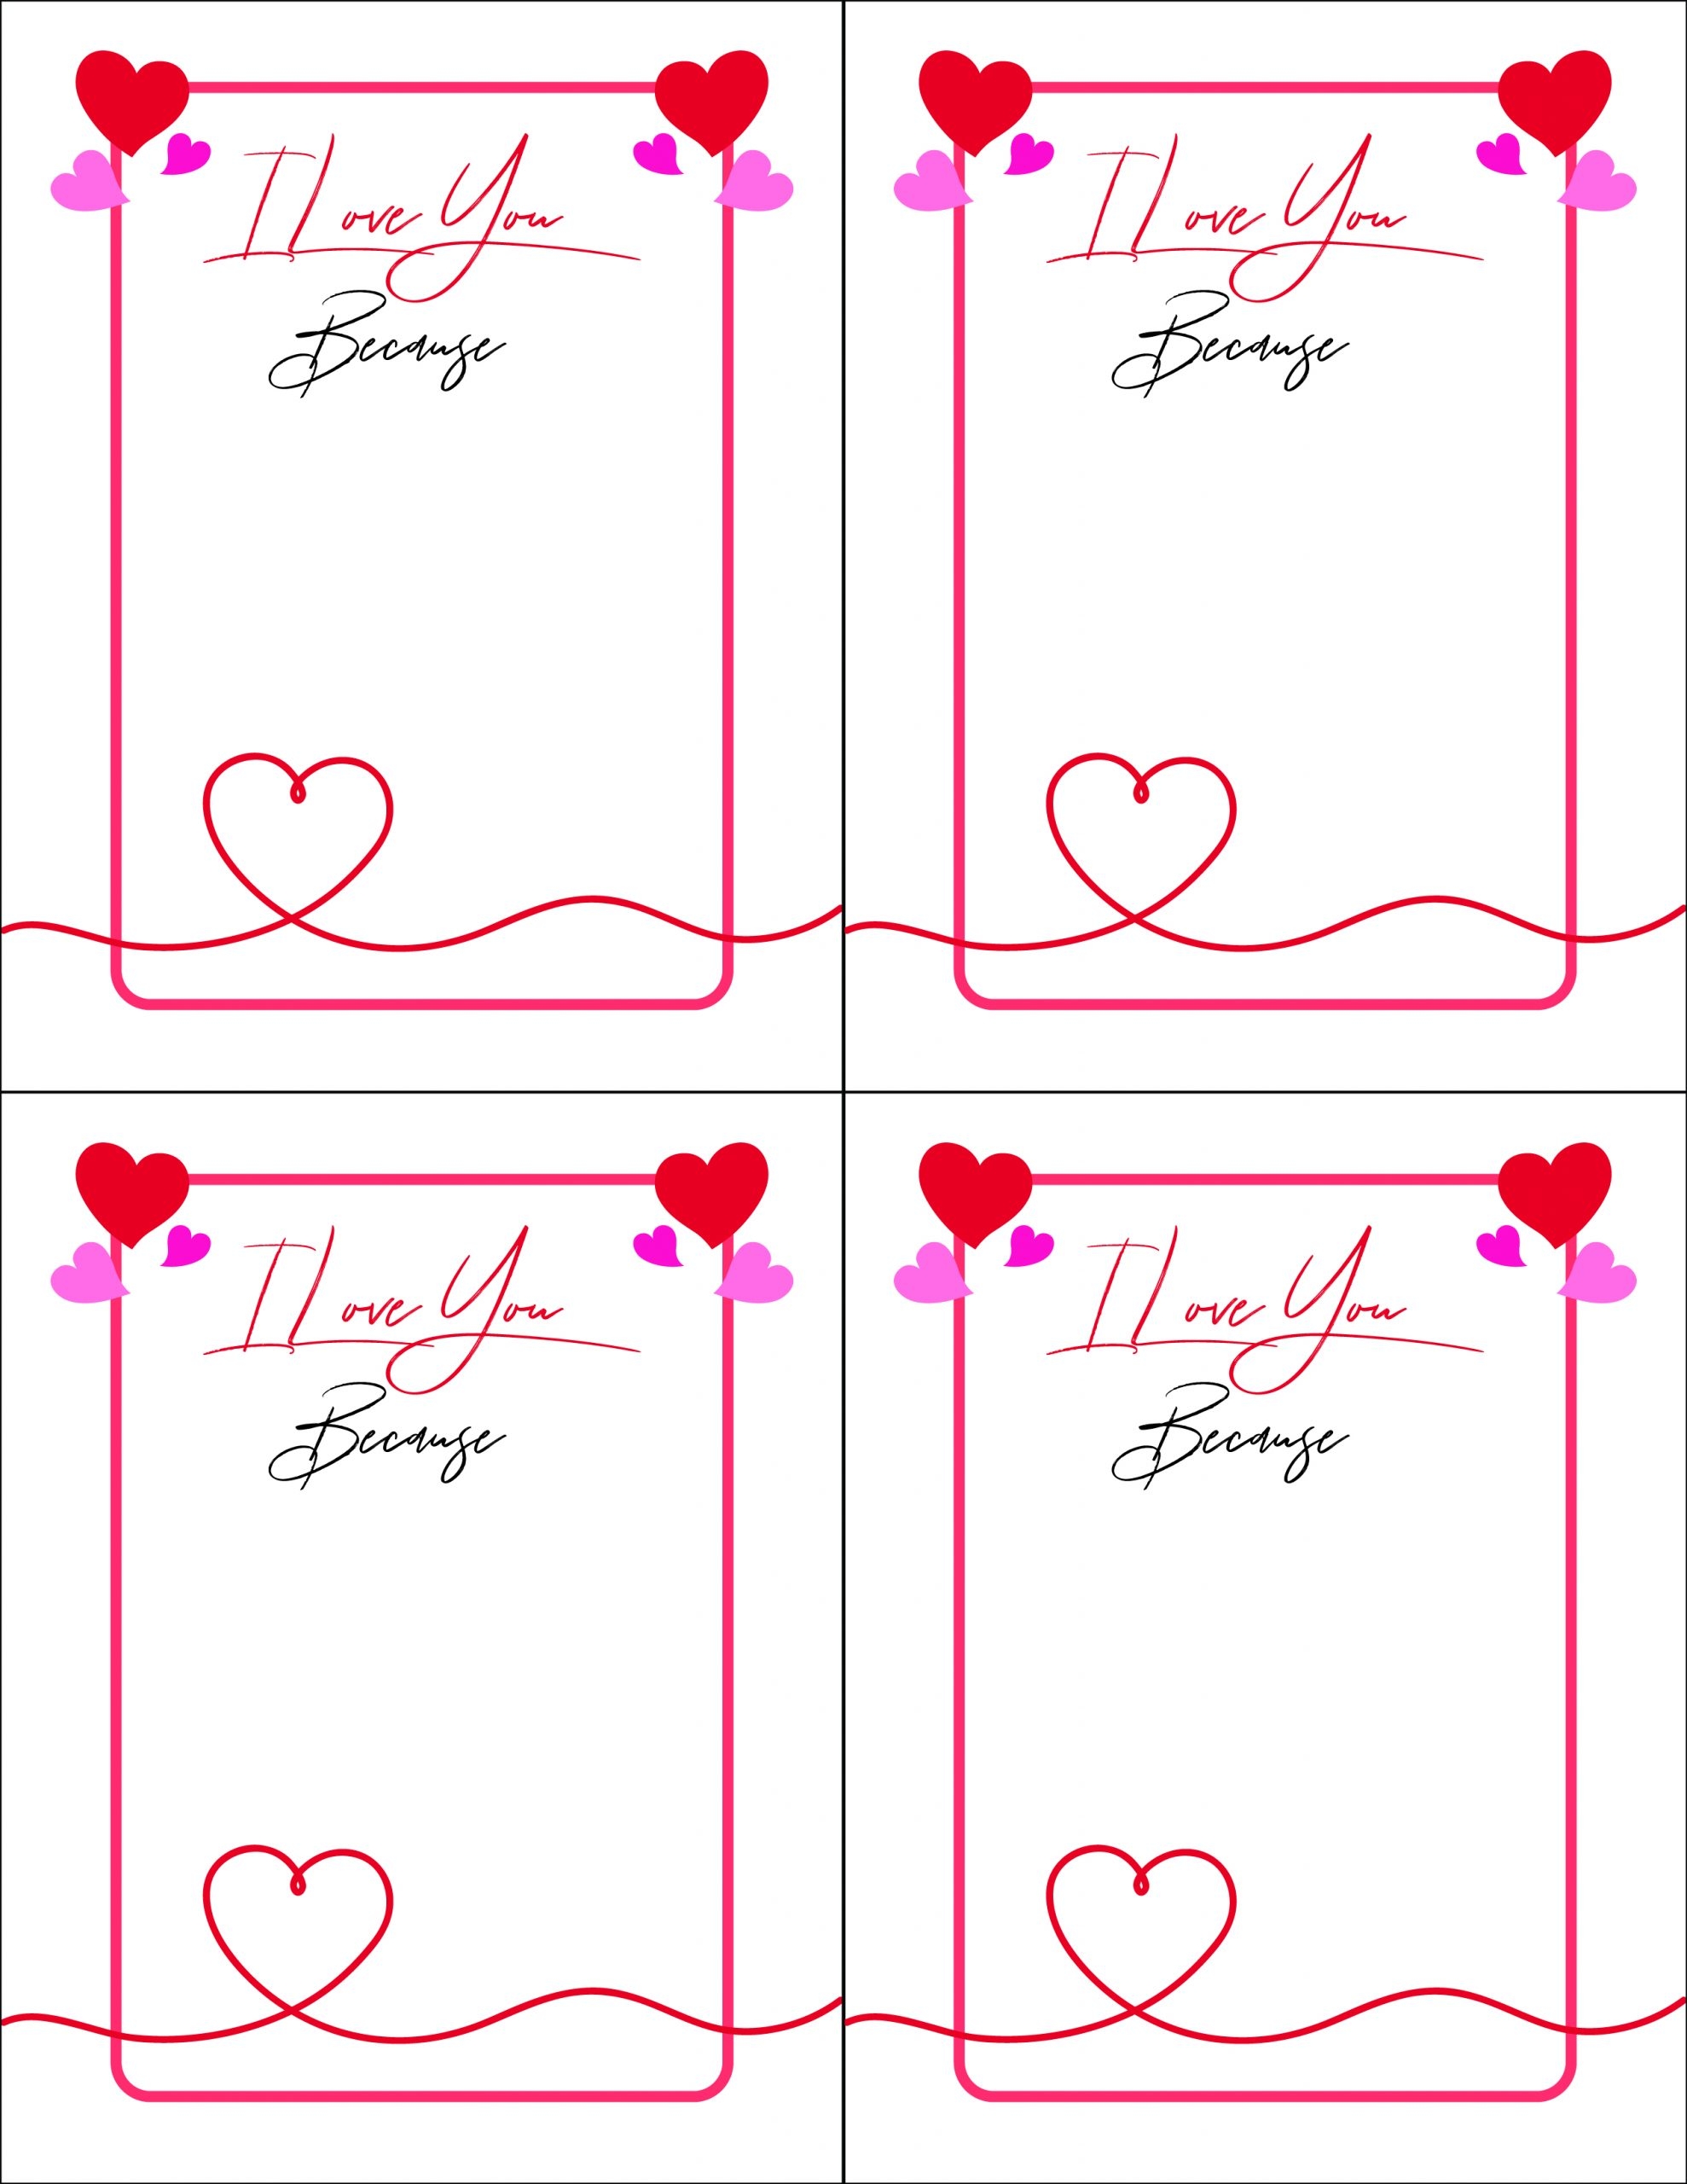 The I Love You Because Family Tradition Free Printable 24 7 Moms